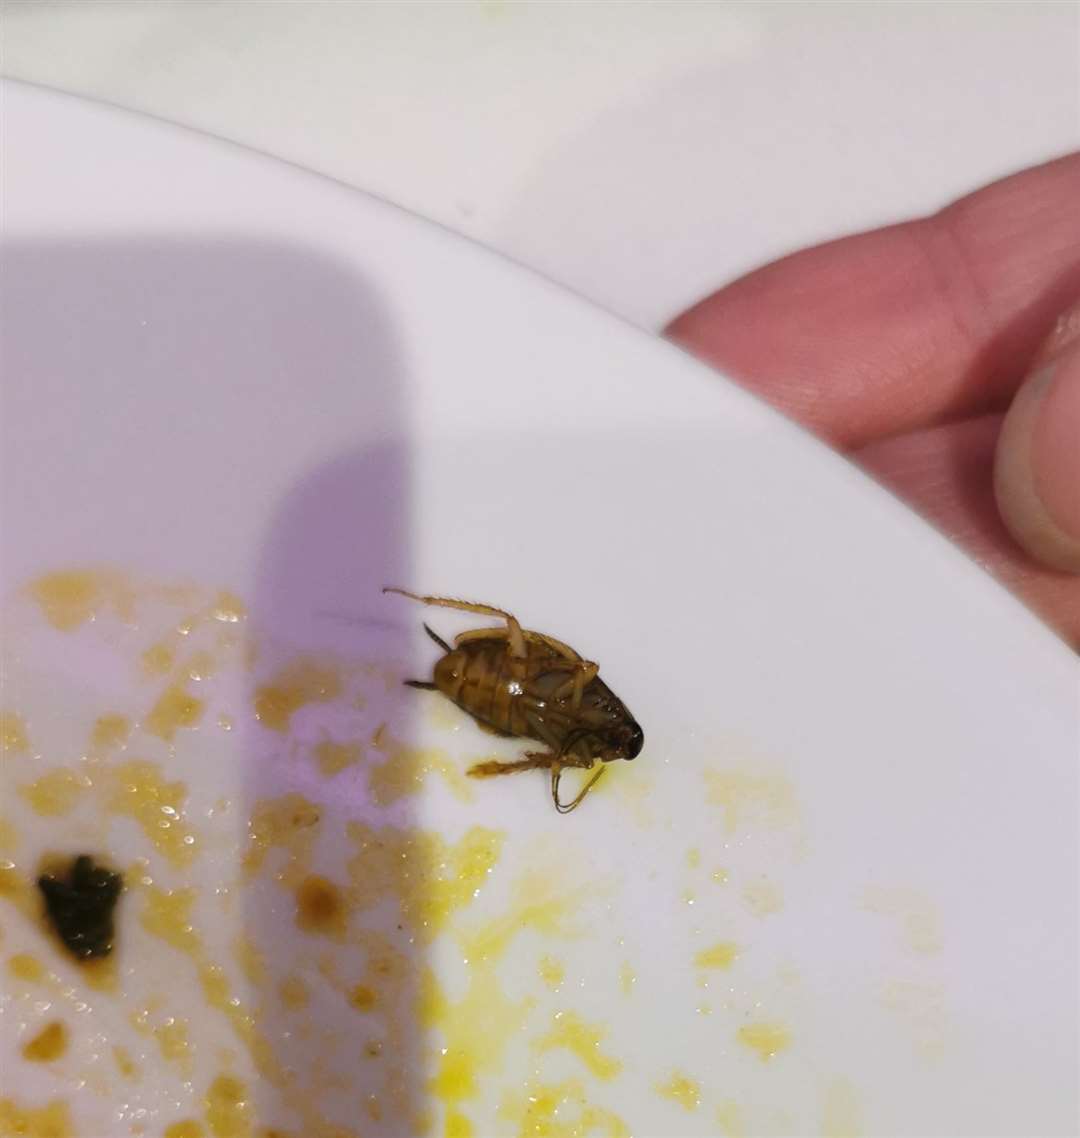 The dead bug, believed to be a cockroach, which was was found on the edge of a plate. Picture: Aidan Jefferson